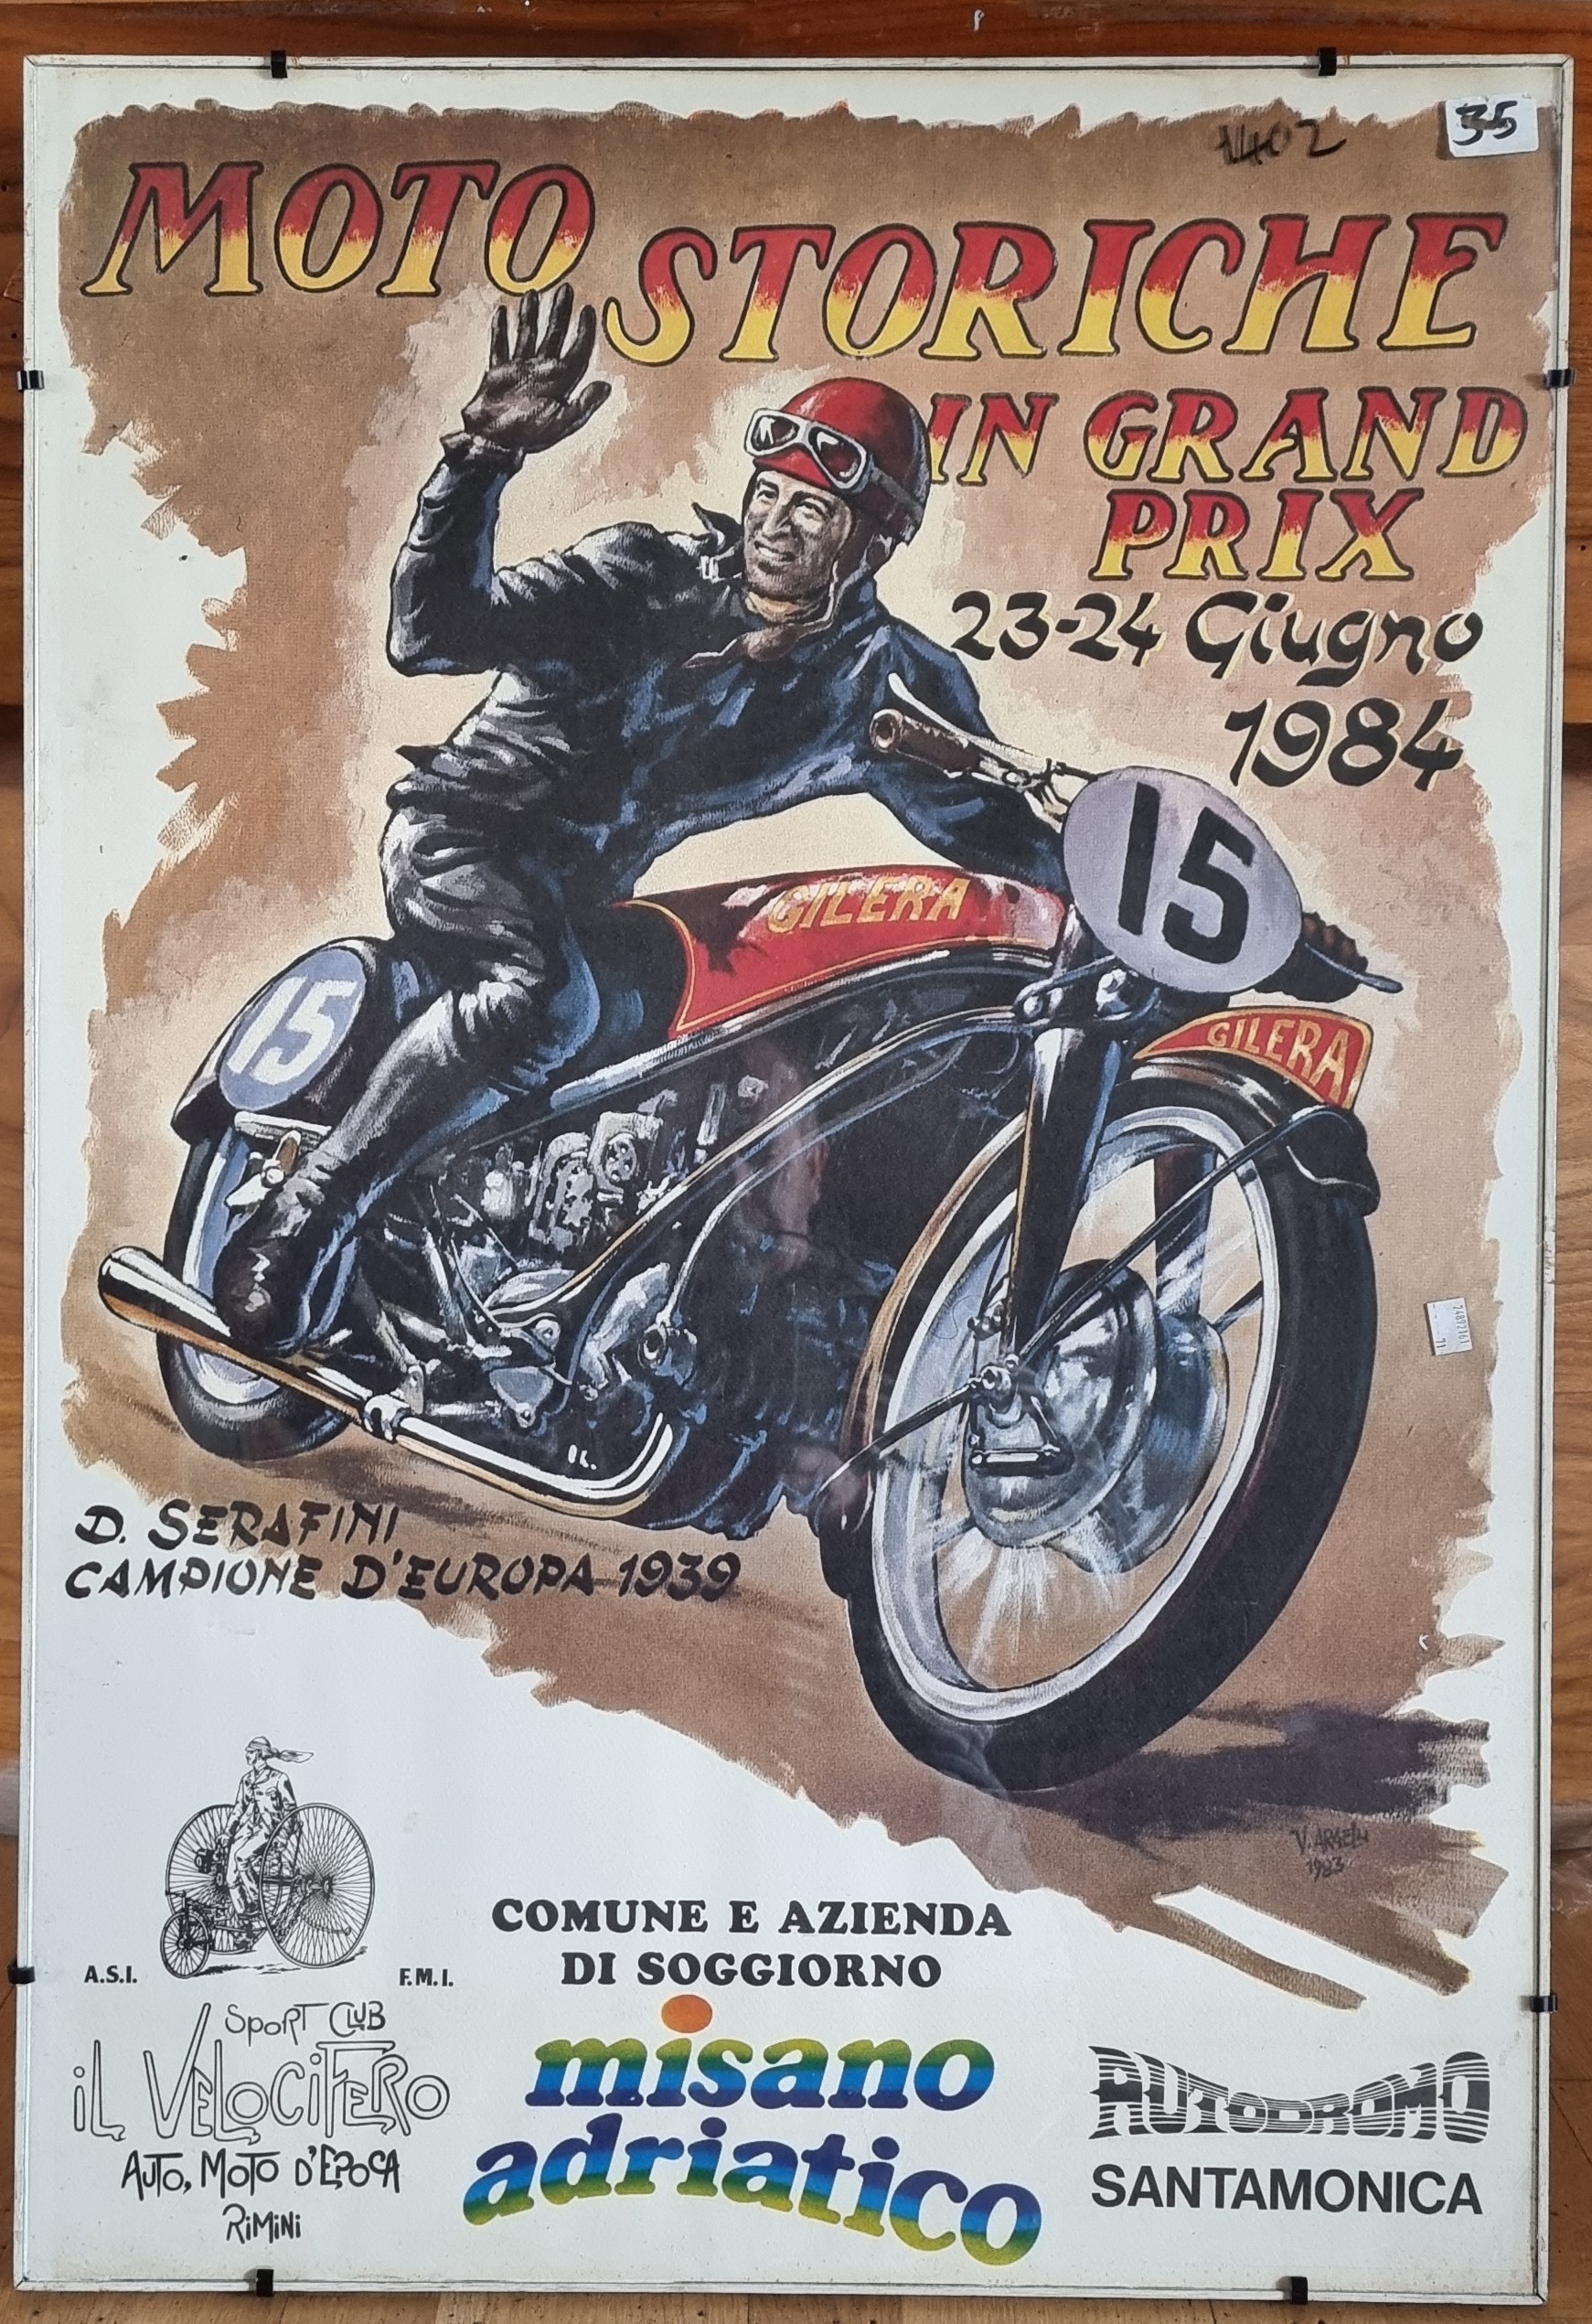 Moto Storiche 1984 Motorcycle Poster, framed, 70 x 100cm, together with a matching ceramic tile,